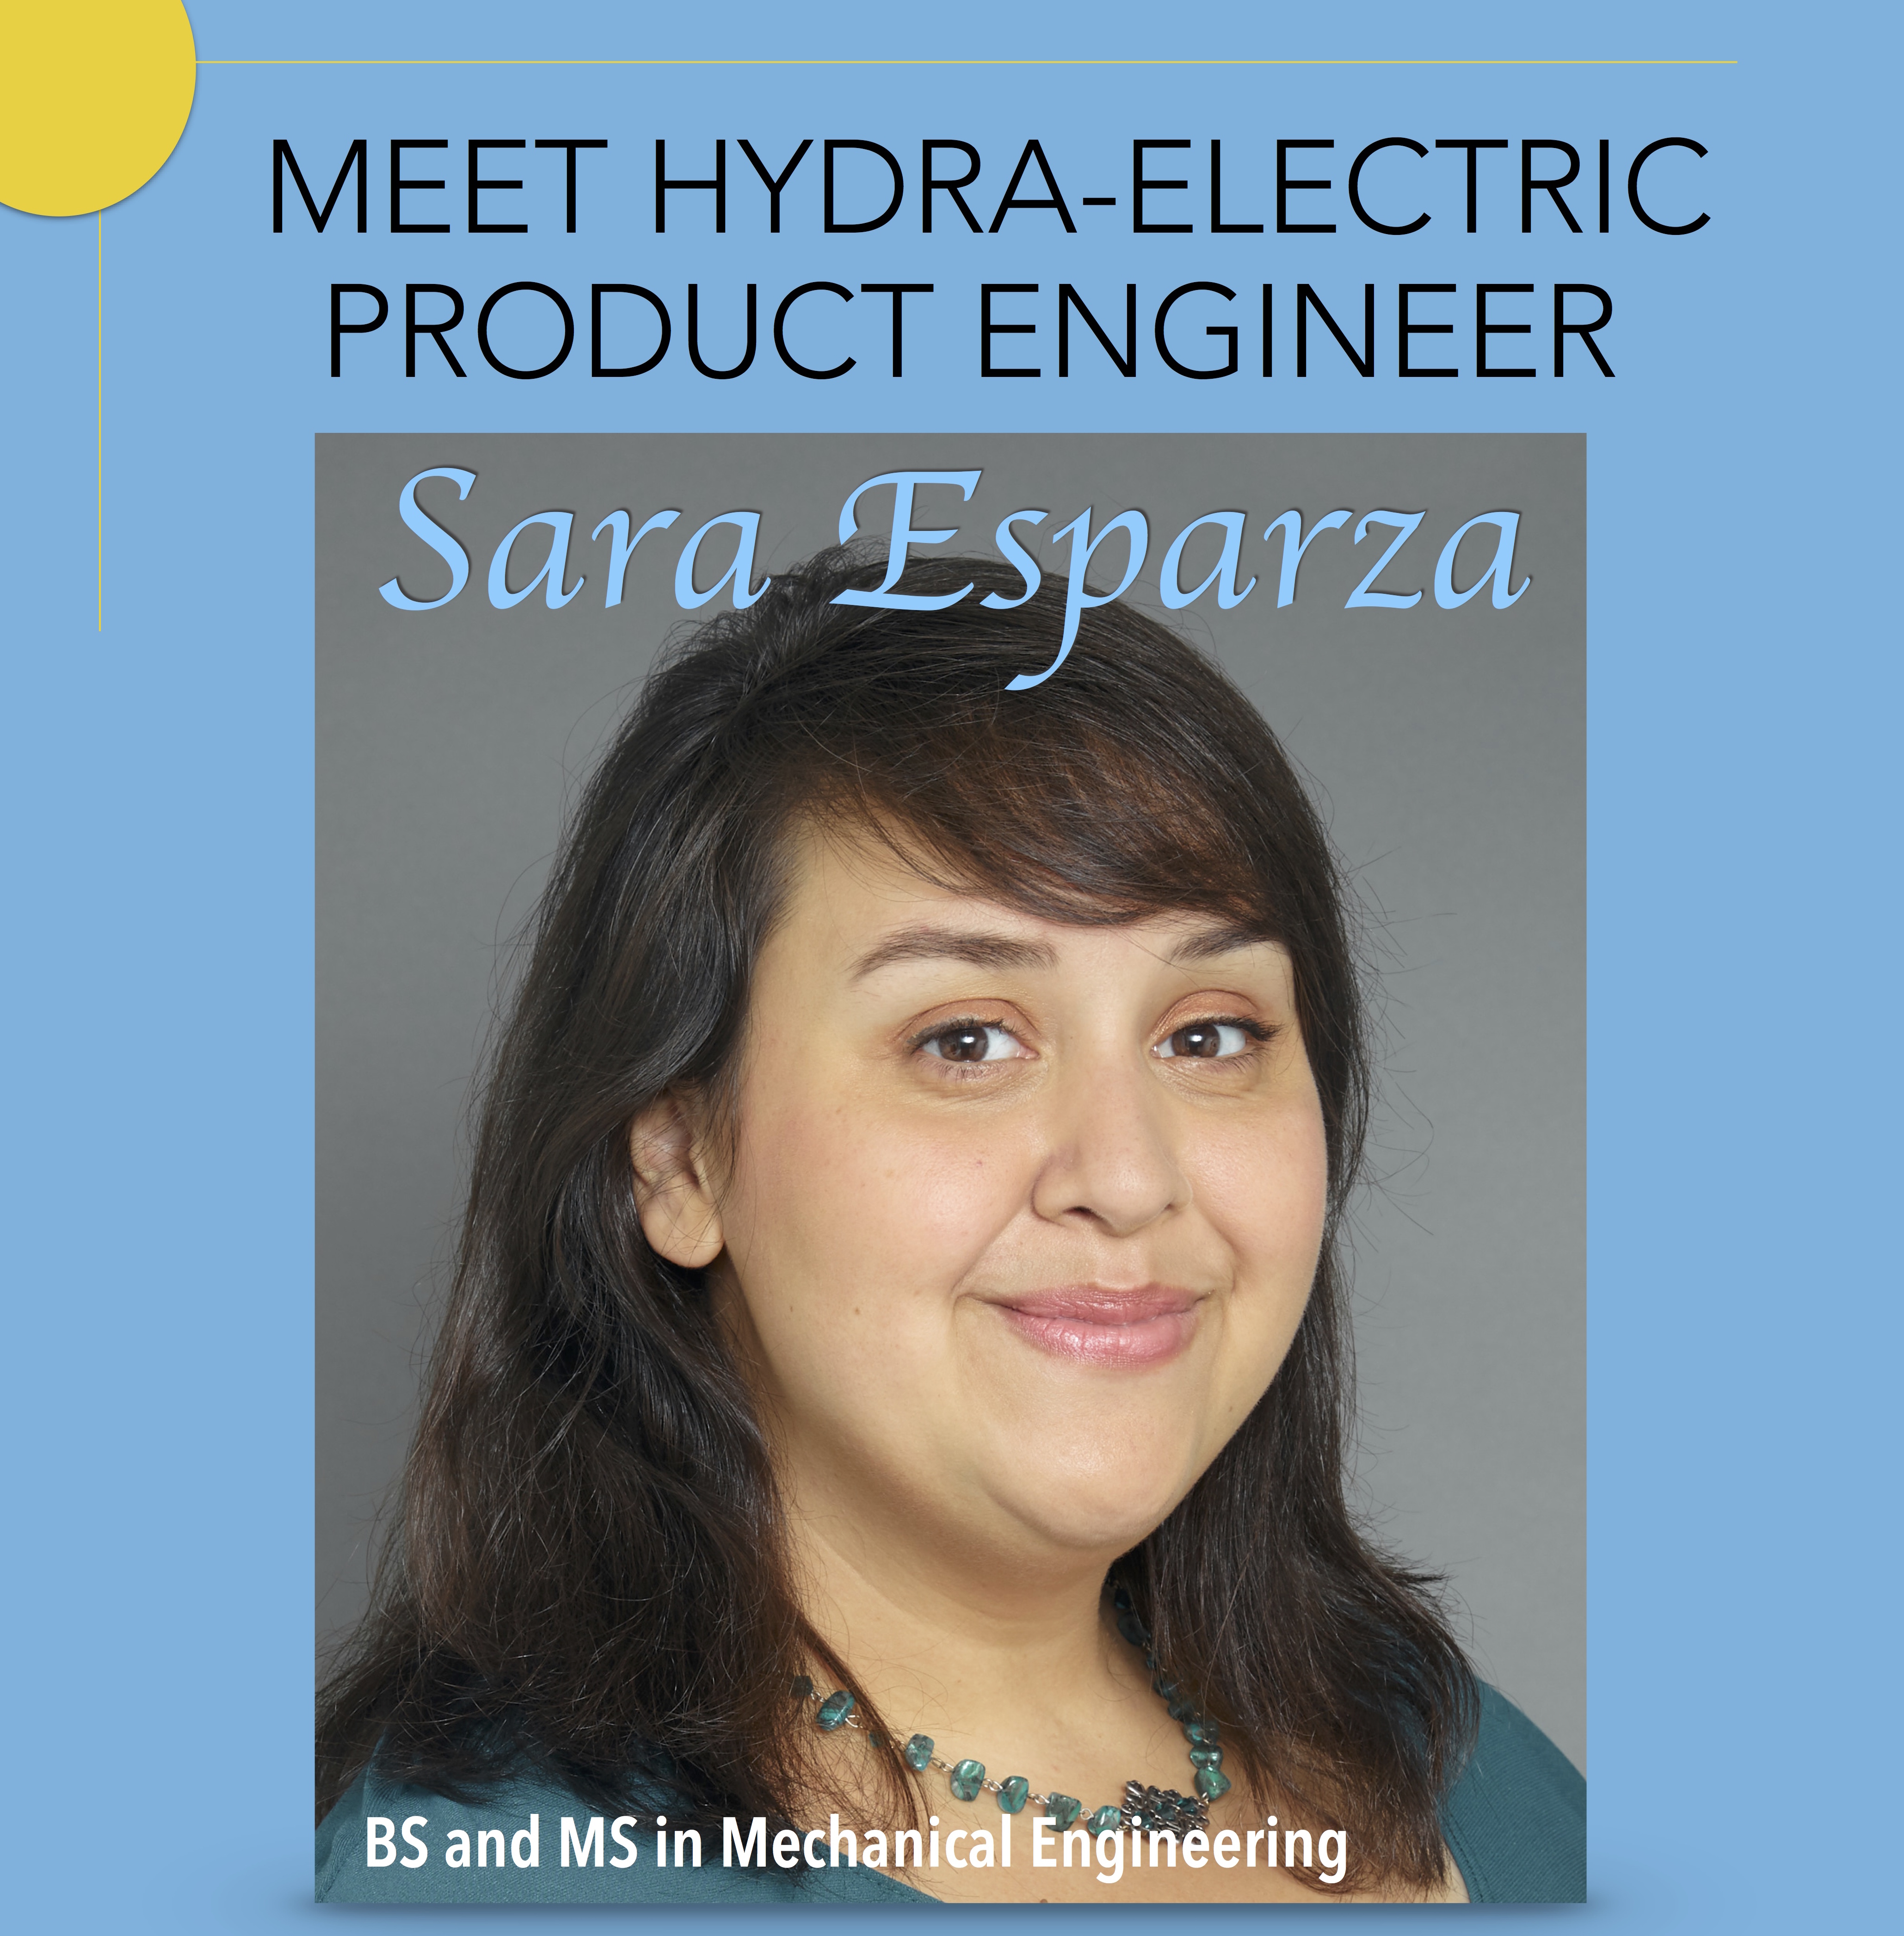 Honoring Women at Hydra-Electric